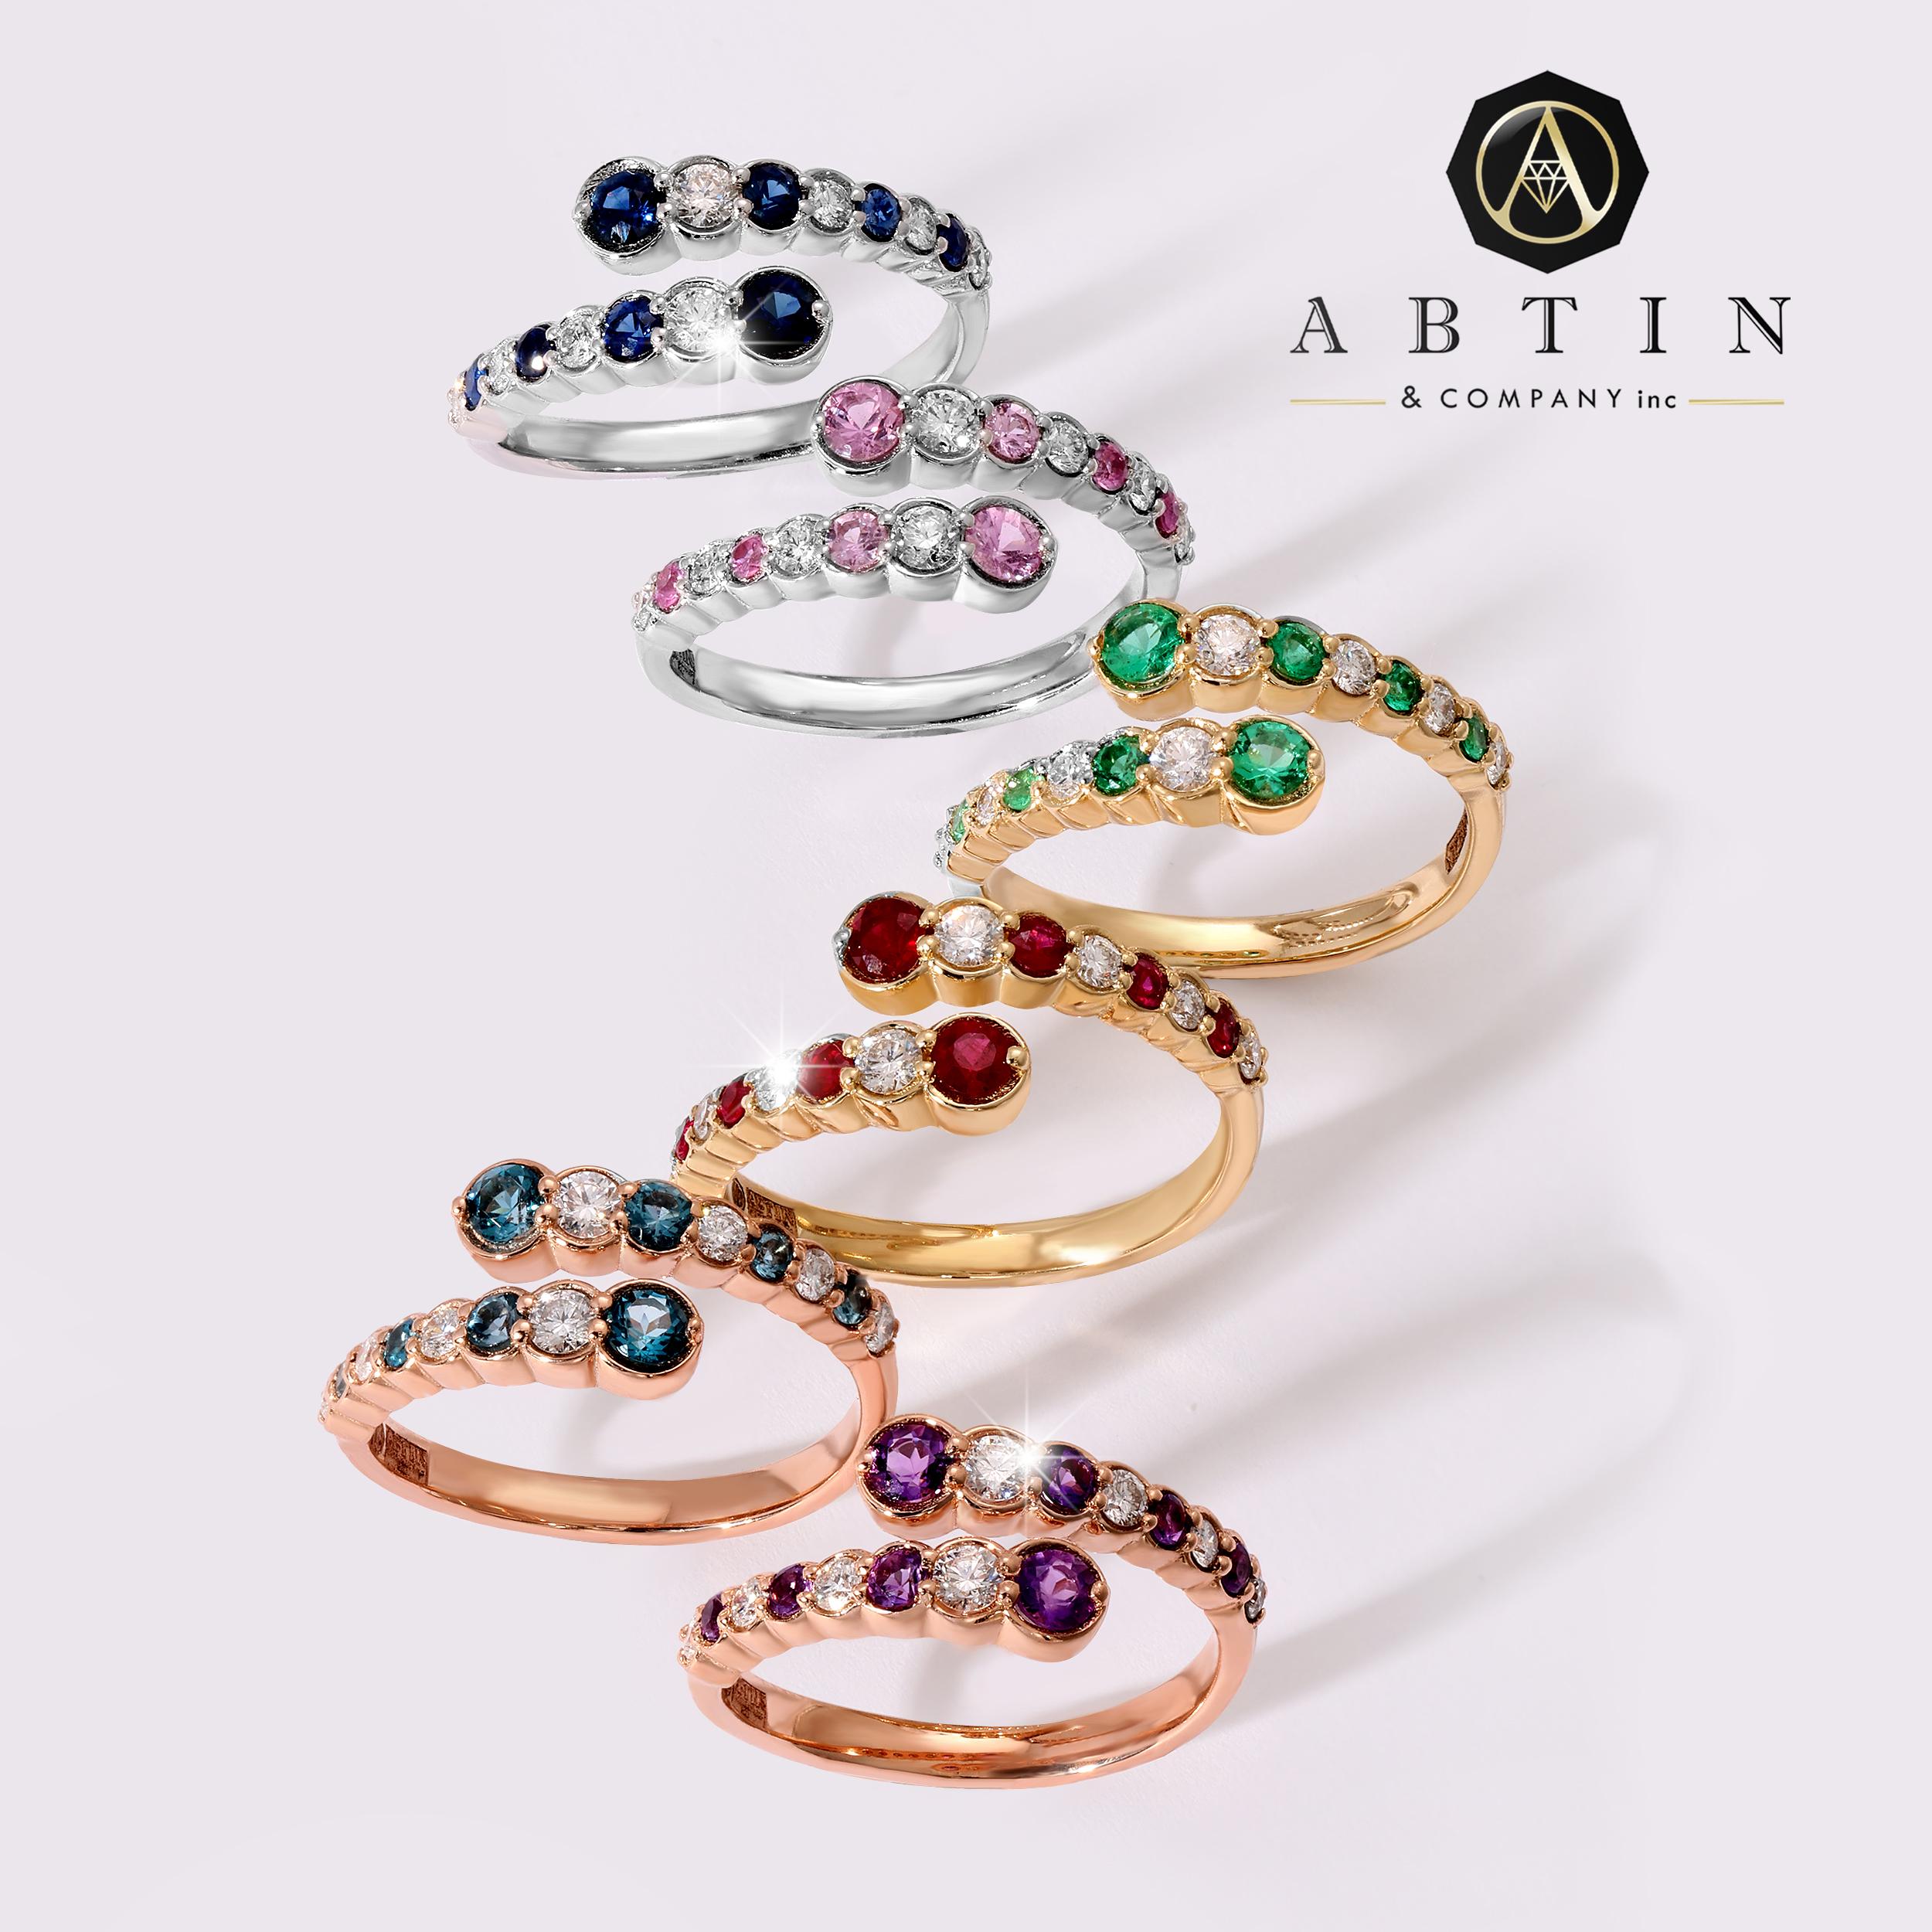 Crafted in 14K gold this ring features a clean and contemporary design. This modern and stylish open bypass alternating ring is set with mesmerizing round-cut diamonds and genuine pink sapphire gemstones. Stack it with your stacking rings or wear it